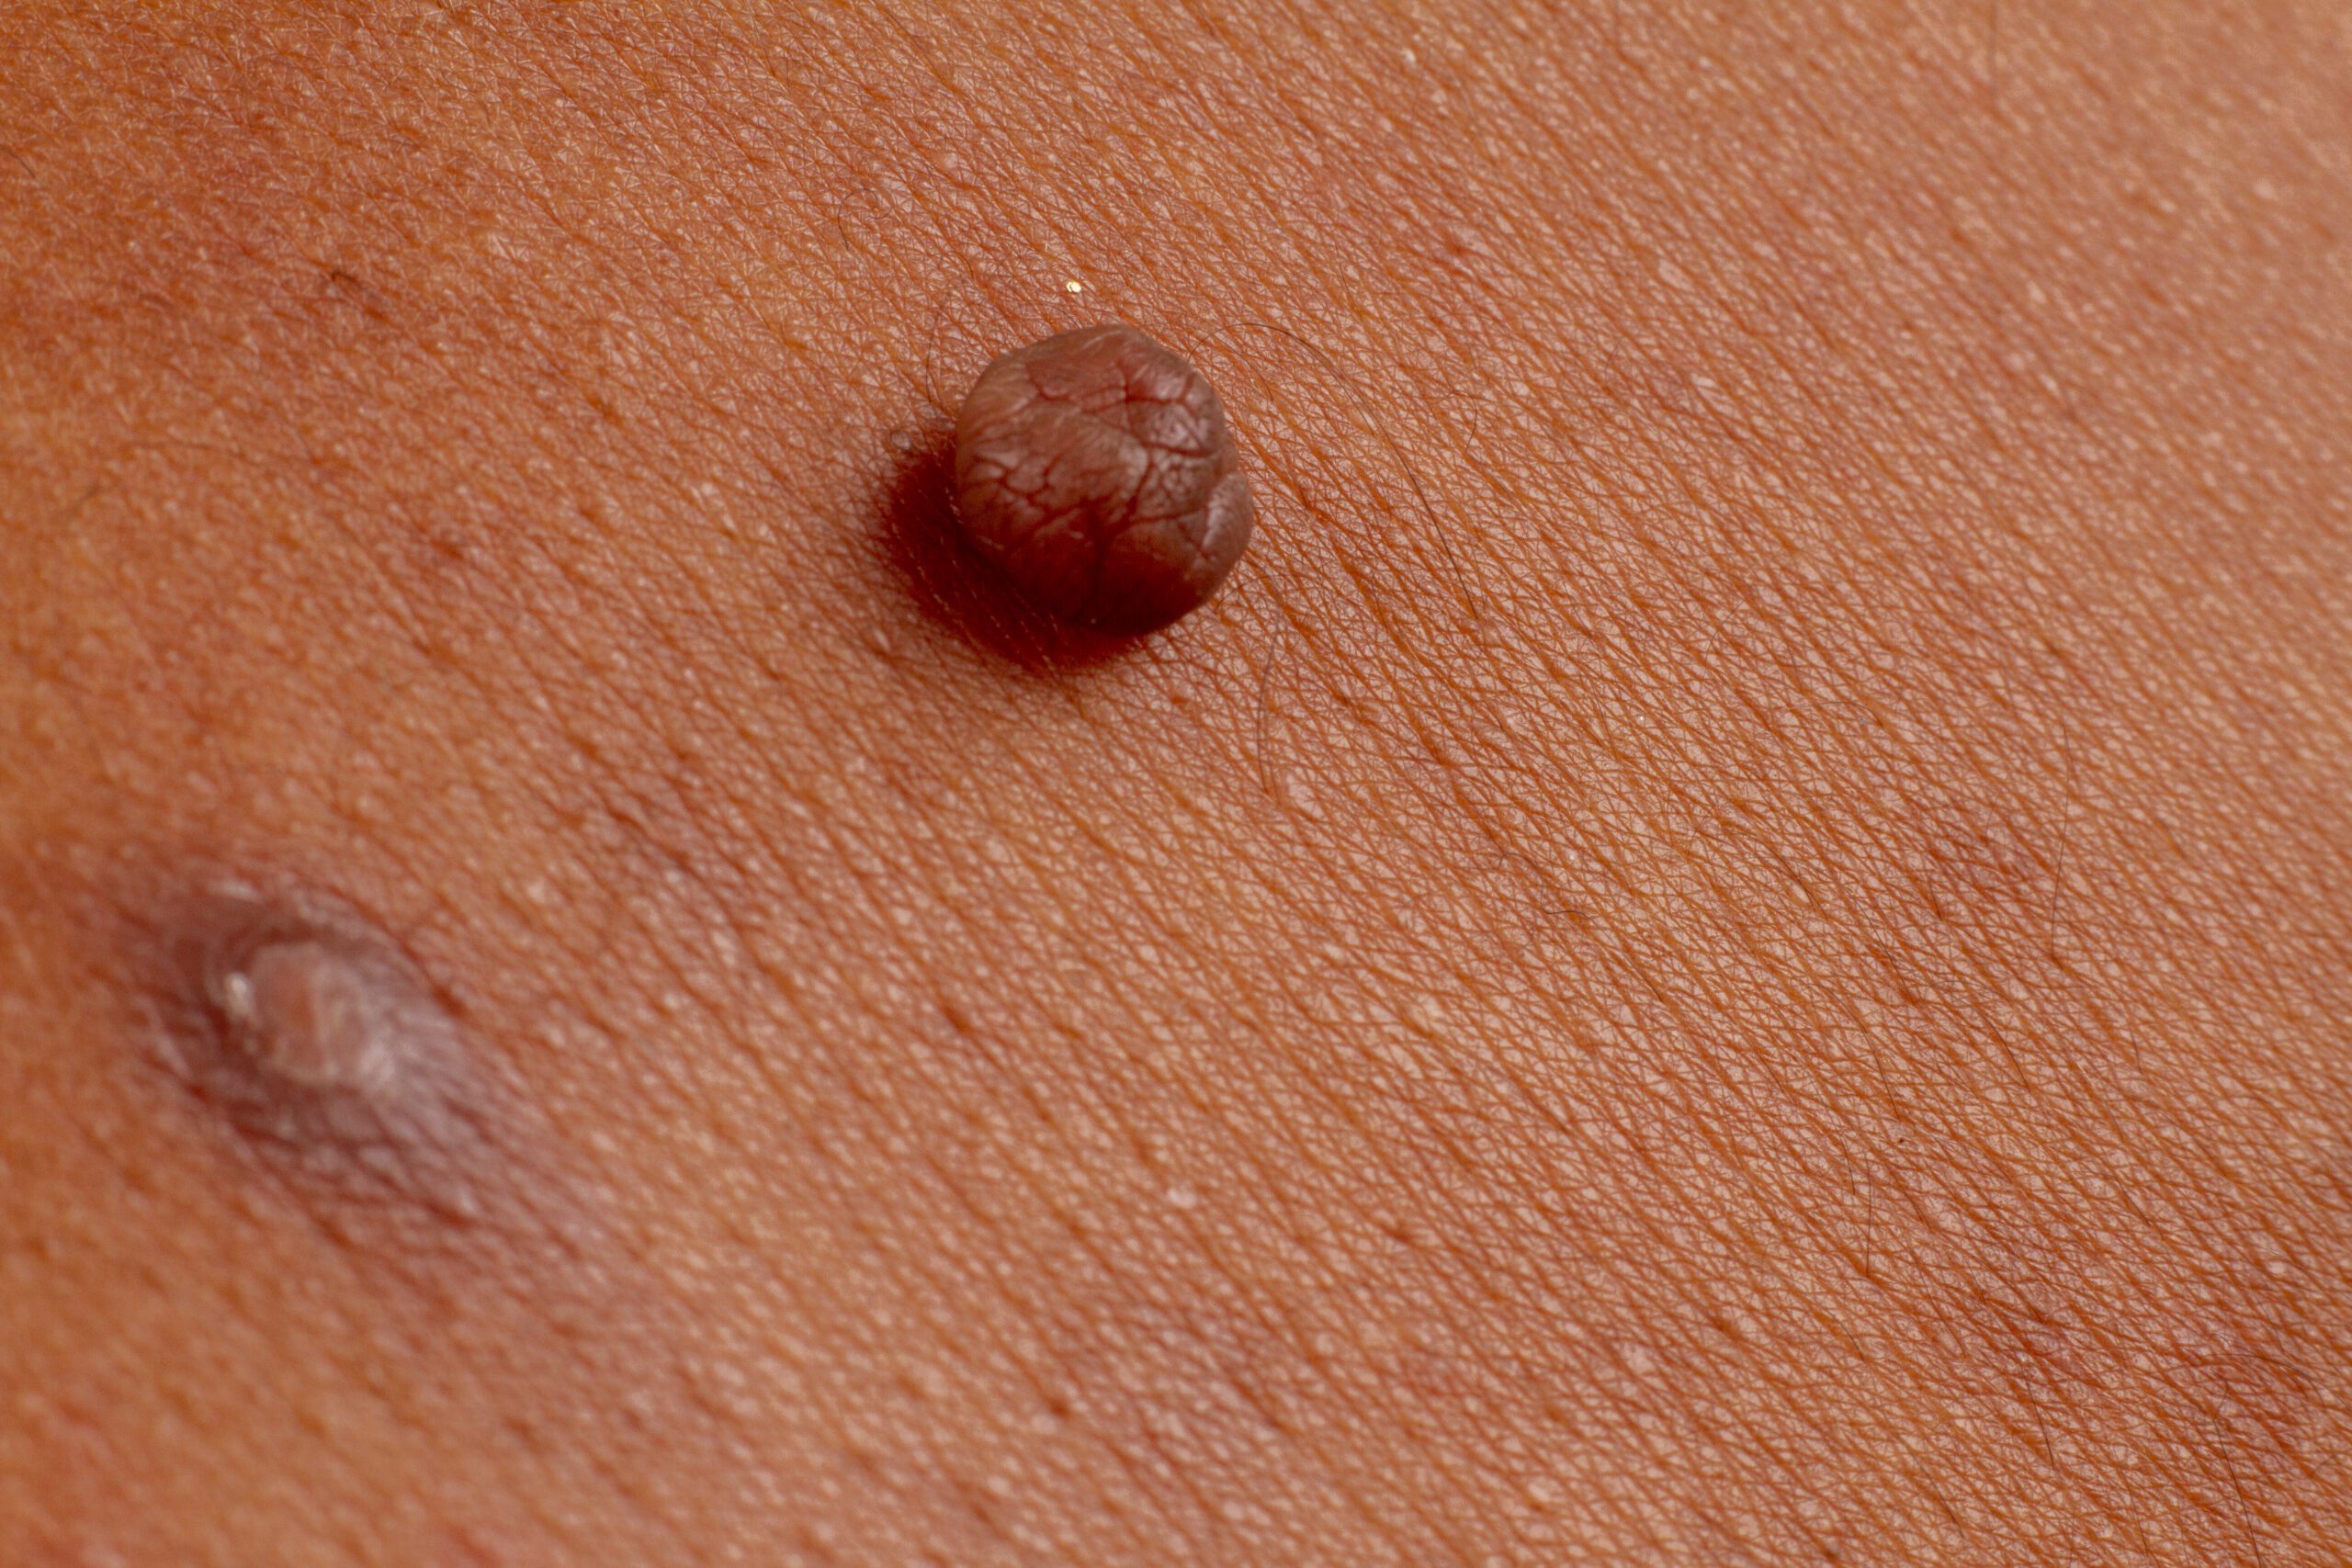 mole and wart on skin